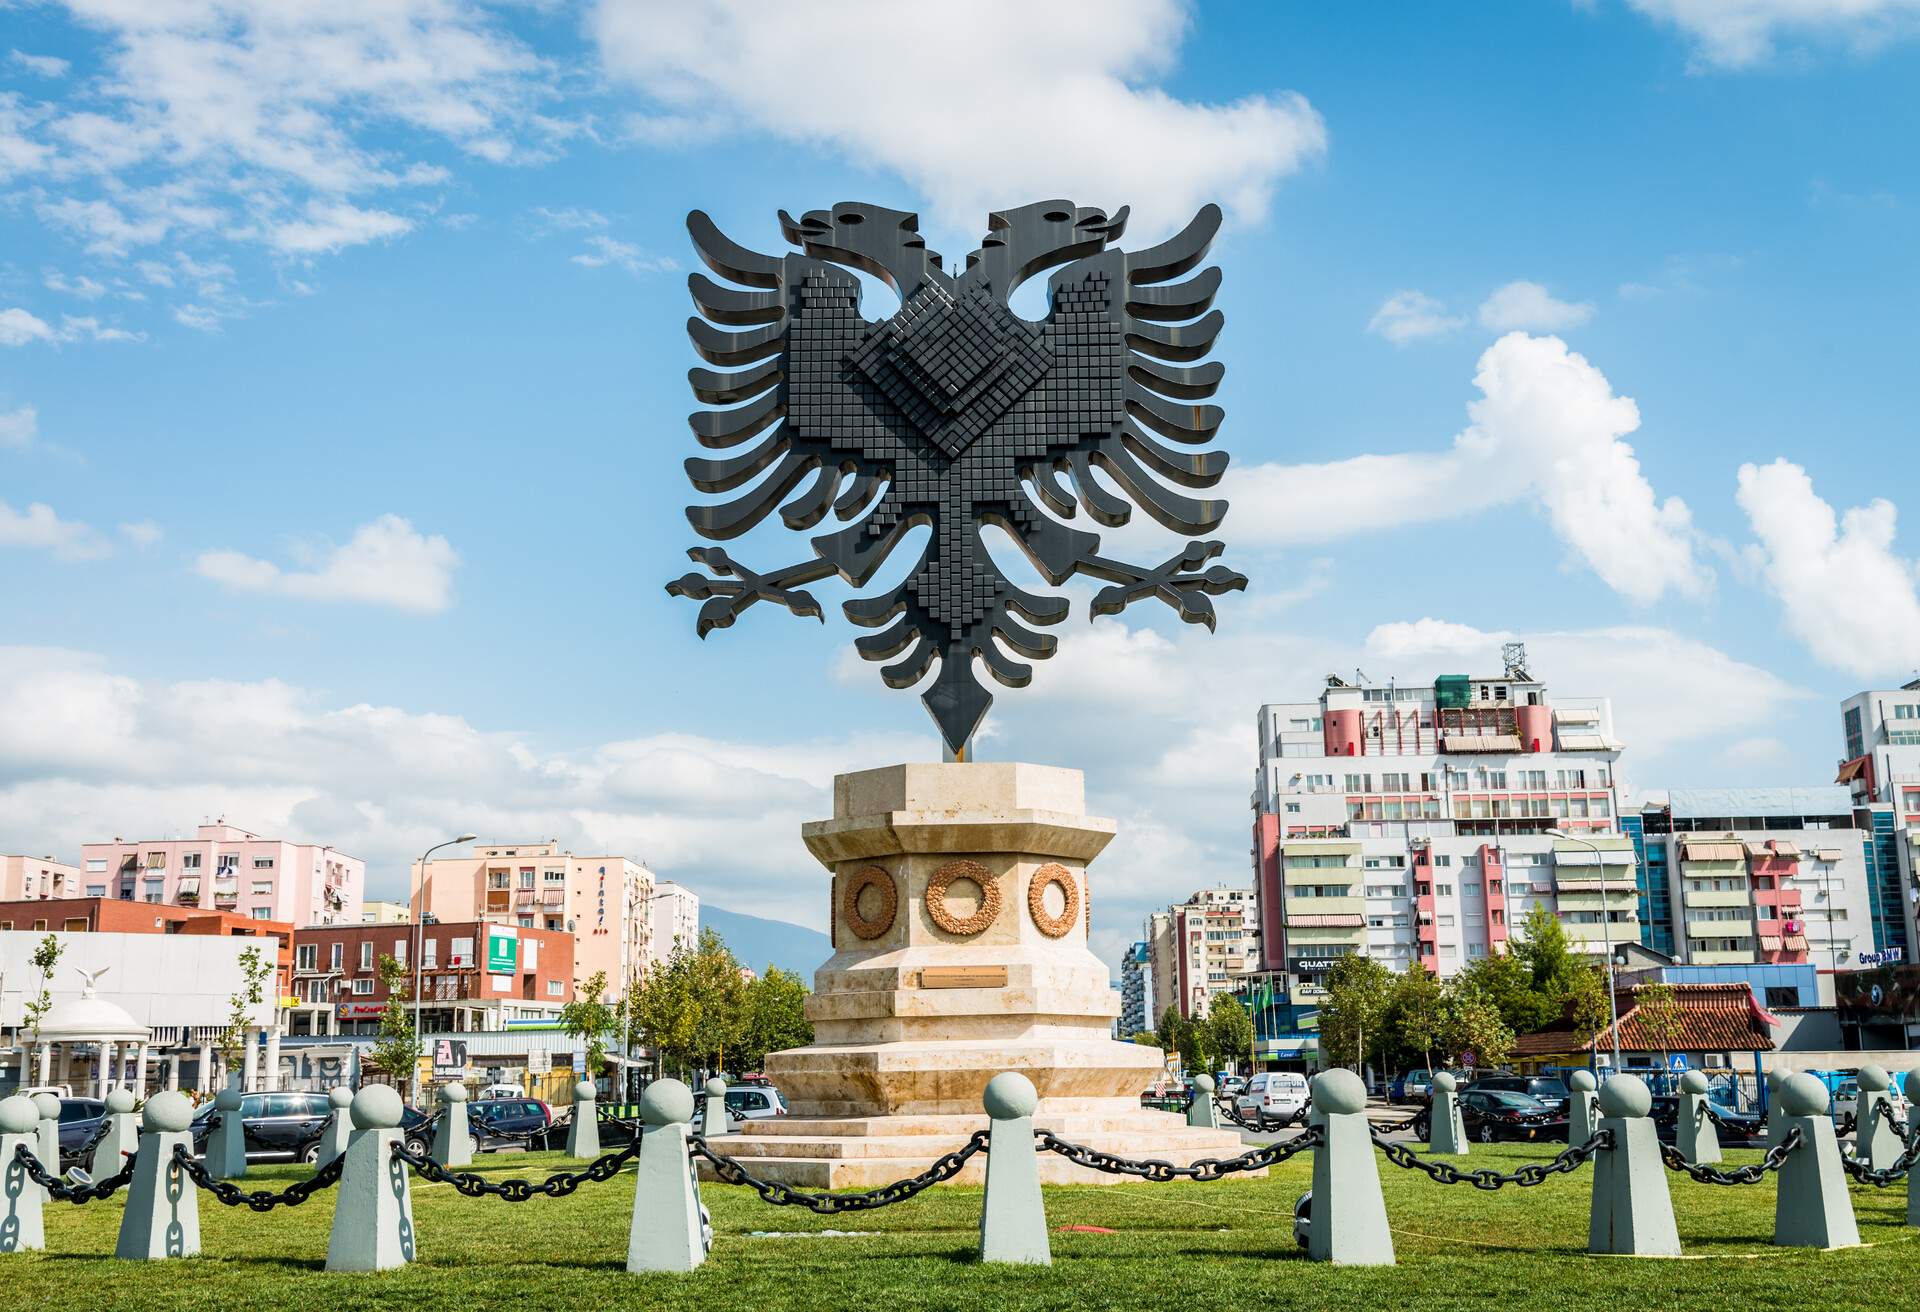 Giant Coat of Arms of Albania Emblem Statue in a street roundabout in the city center of Tirana under blue summer sky with fluffy cloudscape, Tirana, Capital of Albania, South Eastern Europe.